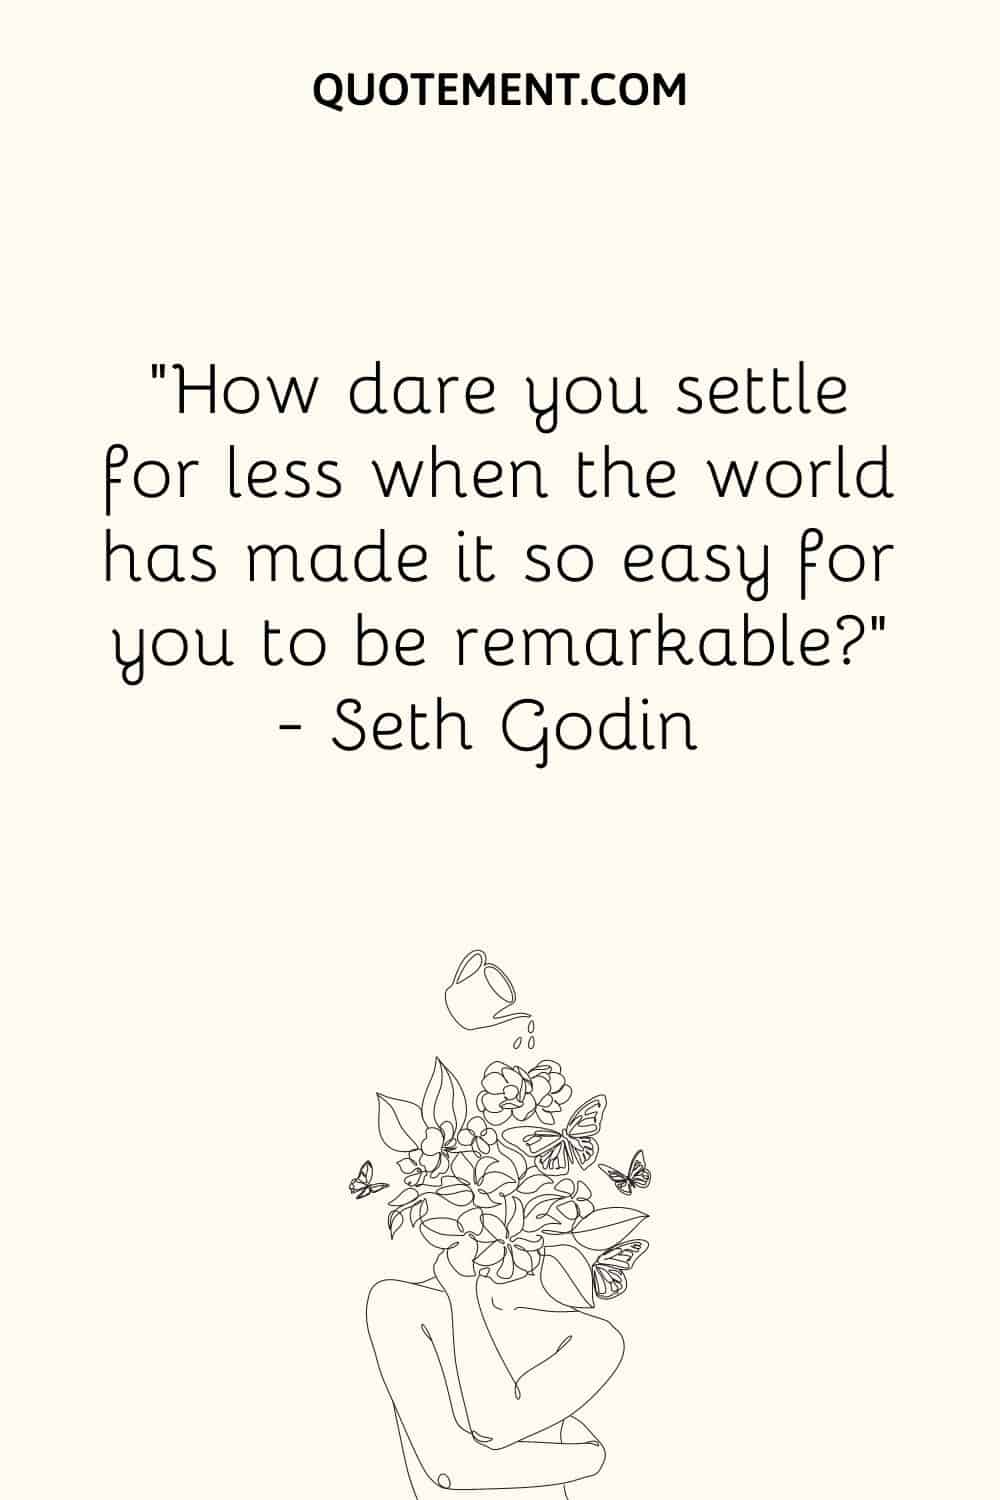 How dare you settle for less when the world has made it so easy for you to be remarkable